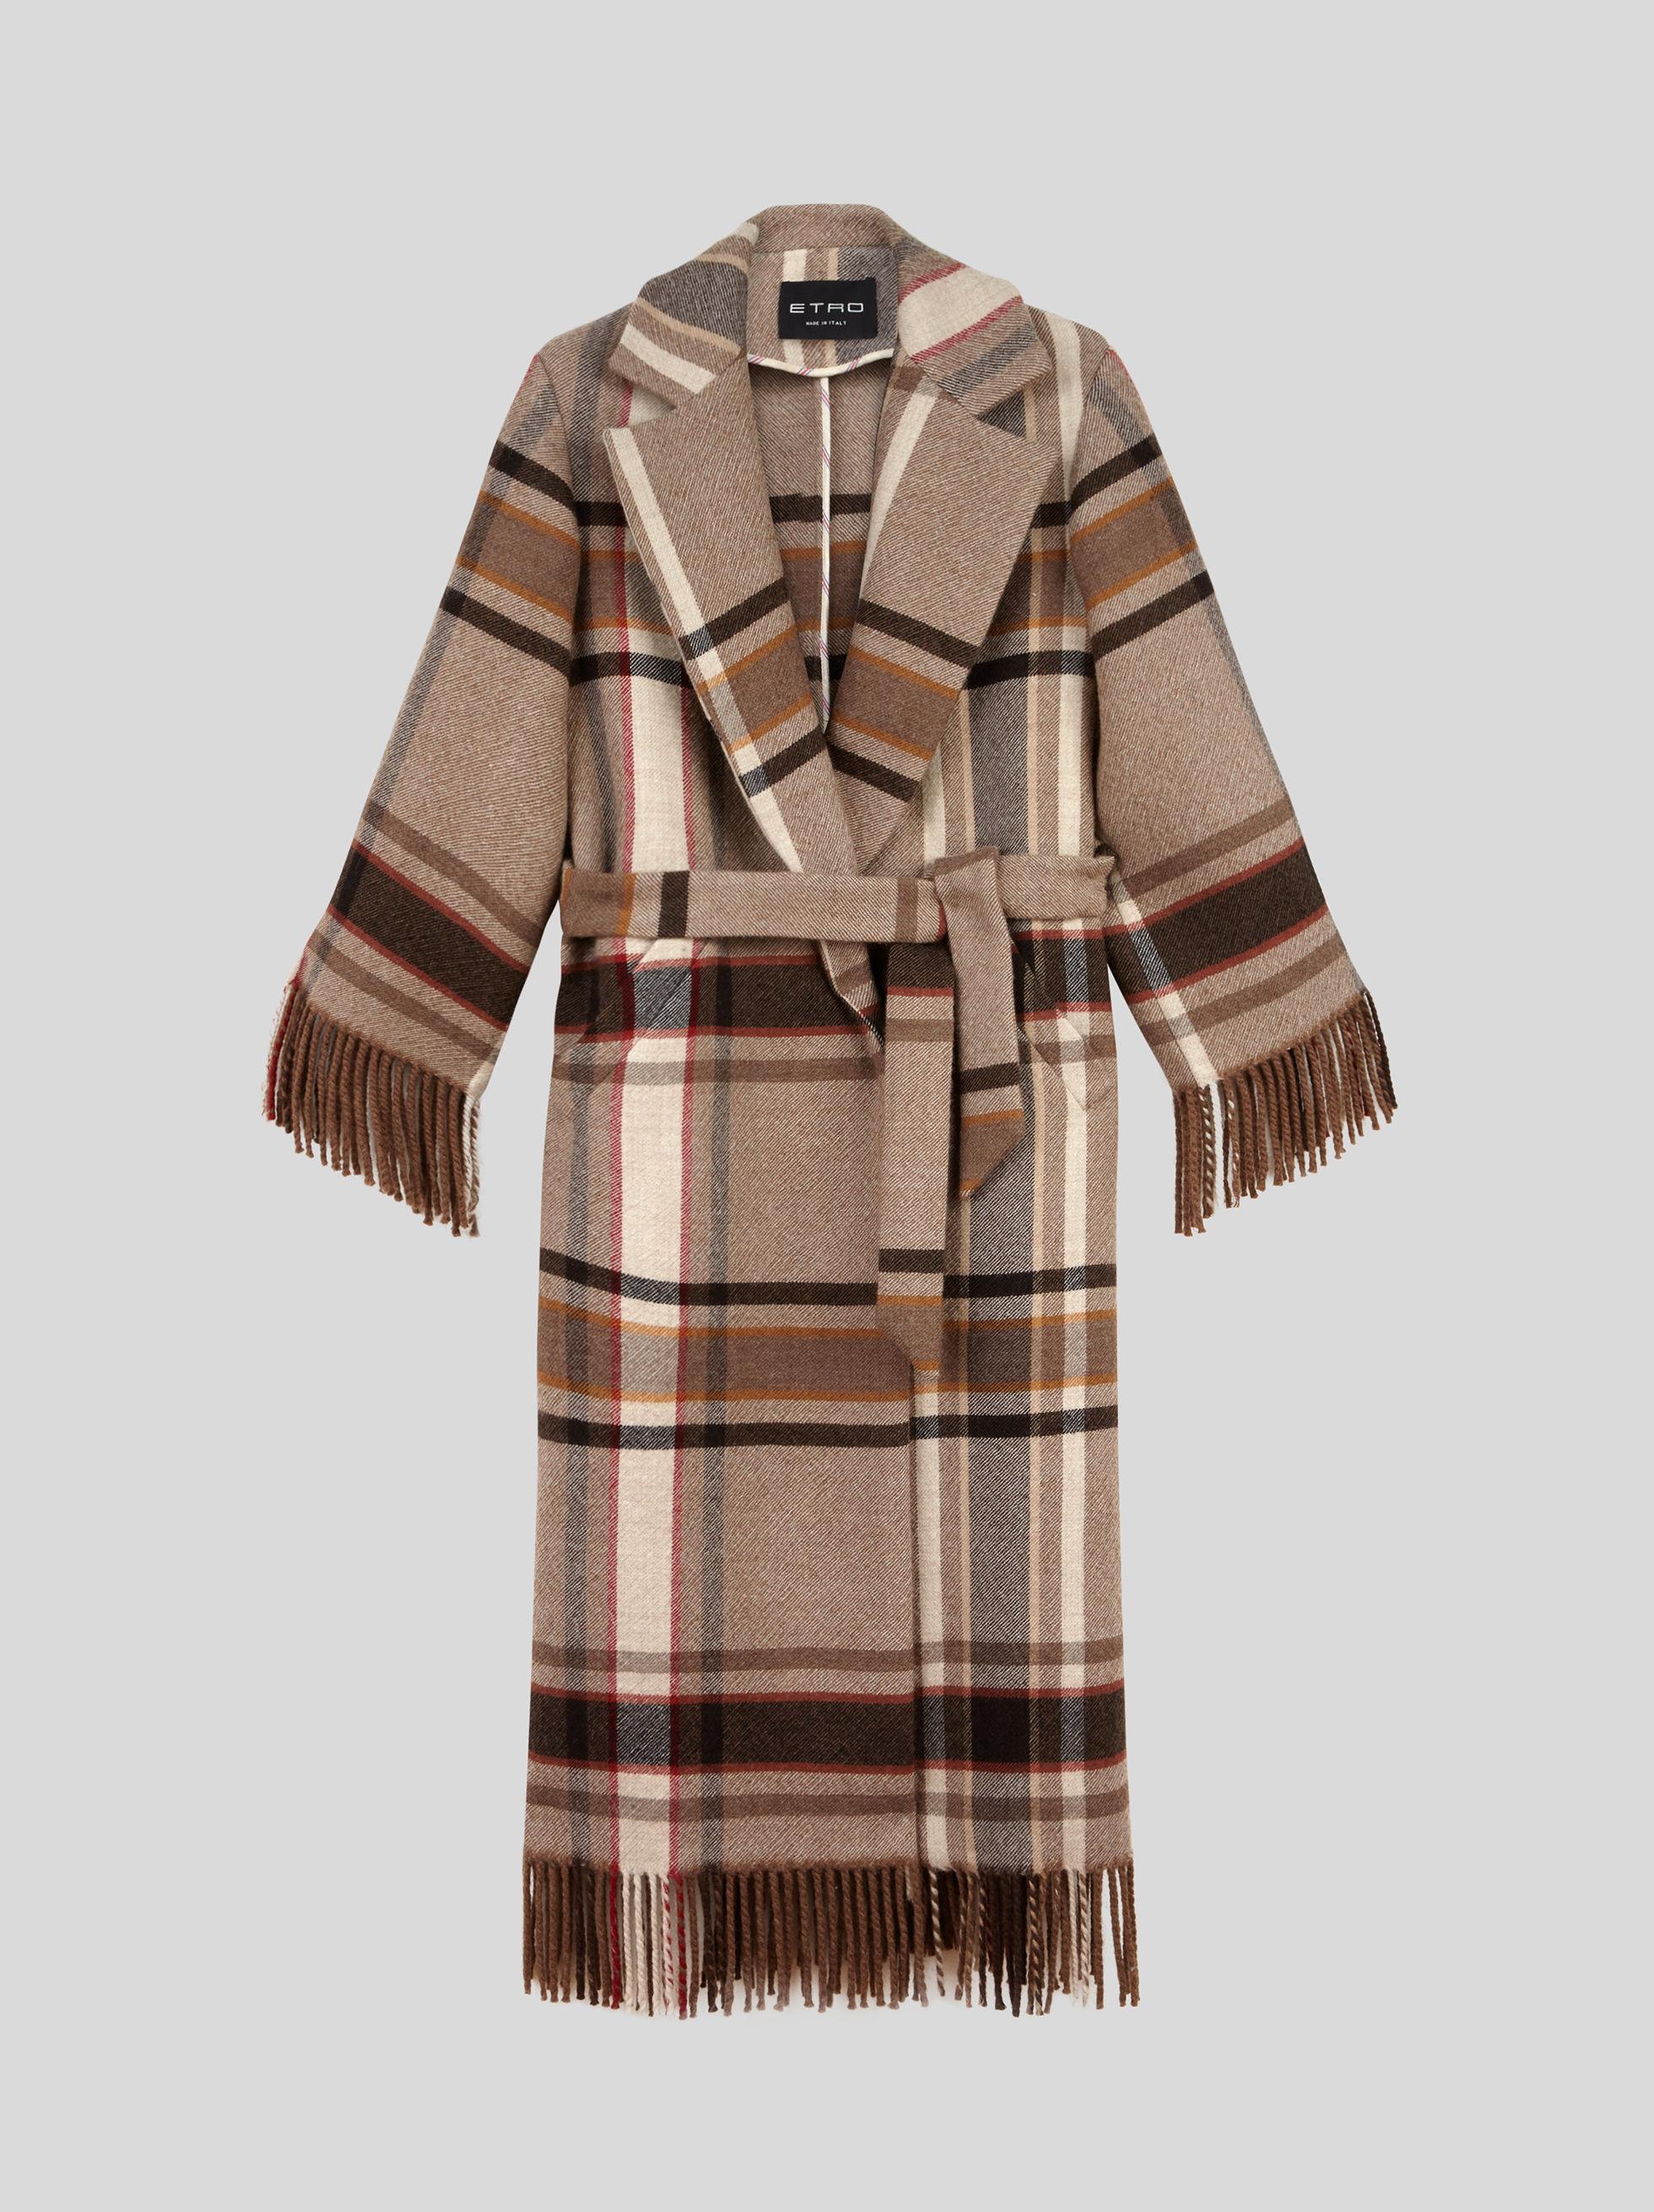 Etro Check Wool Coat With Fringe in Brown | Lyst